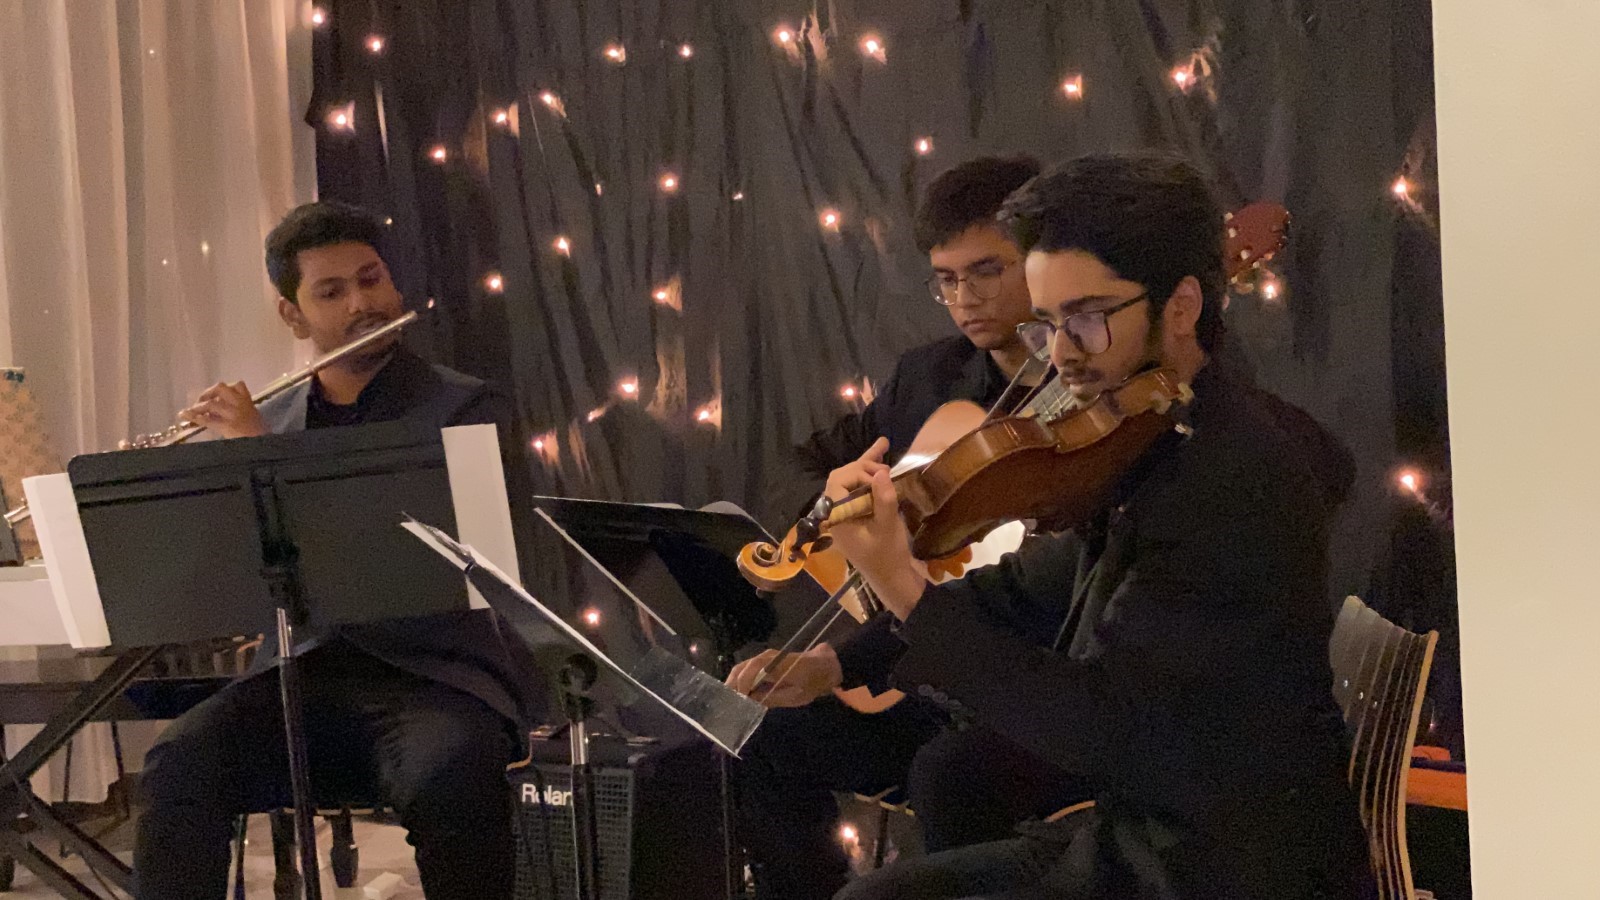 “THIS IS A WONDERFUL OPPORTUNITY!” - Meet the Classical Music Academy of Dhaka